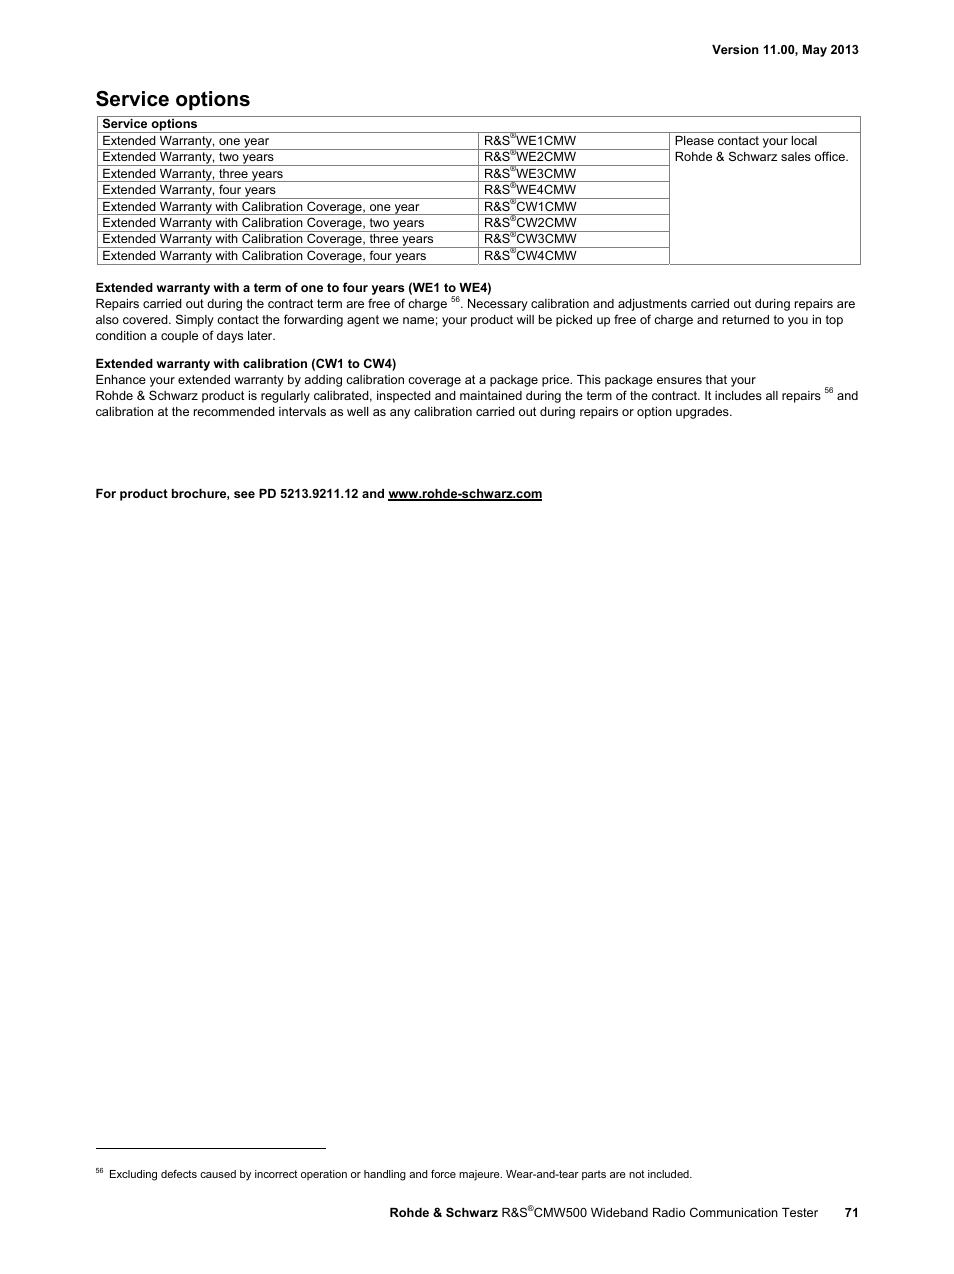 Service options | Atec Rohde-Schwarz-CMW500 User Manual | Page 71 / 72